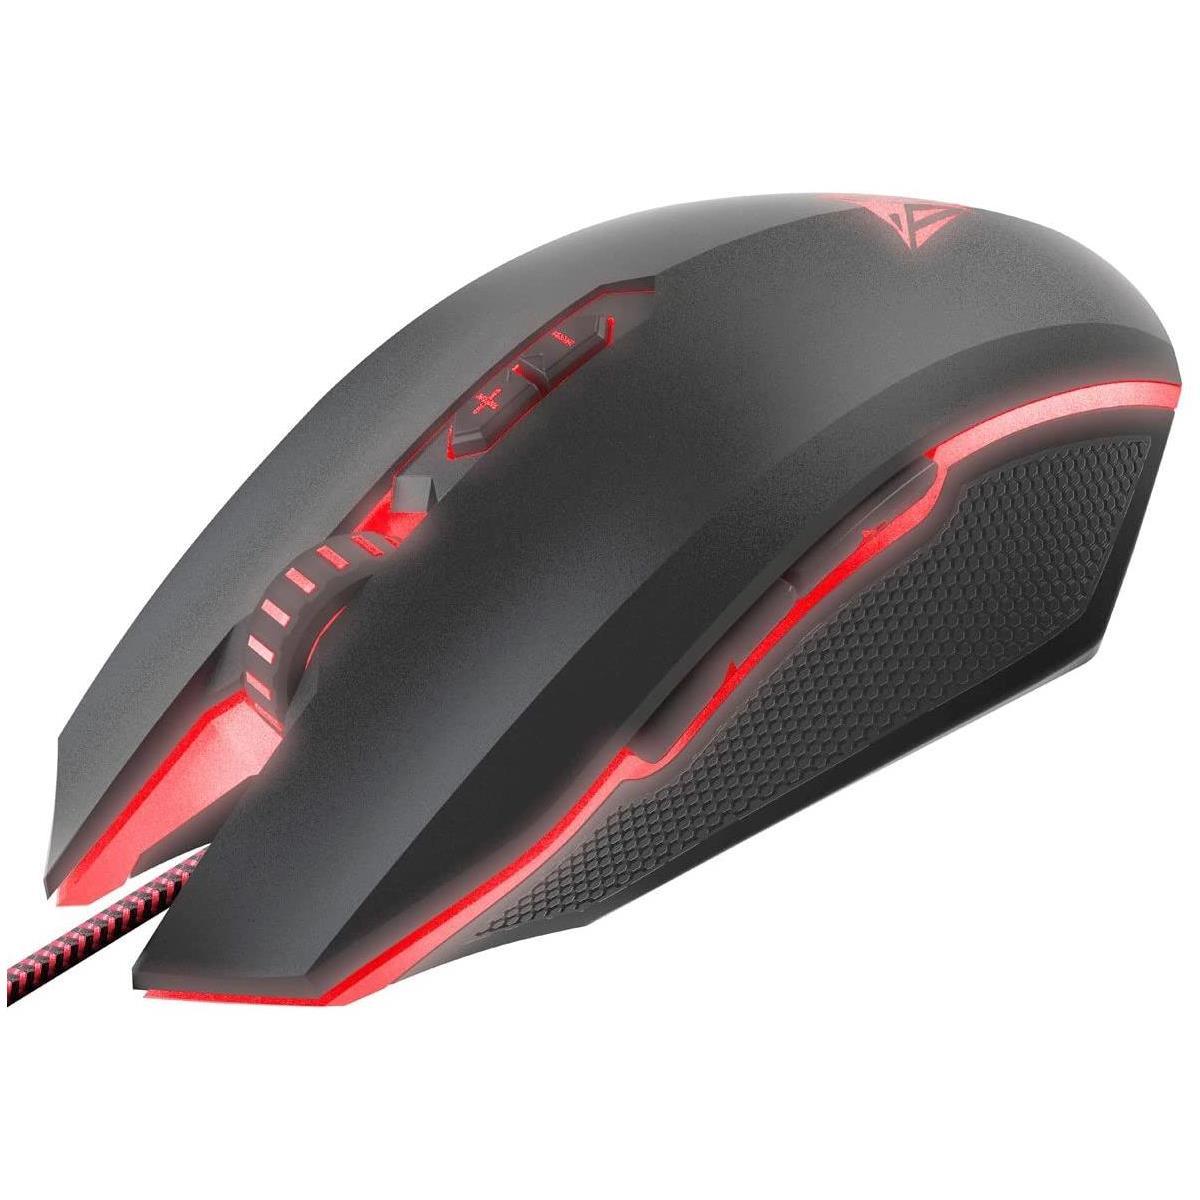 Patriot Viper V530 Optical Gaming Mouse - Wired